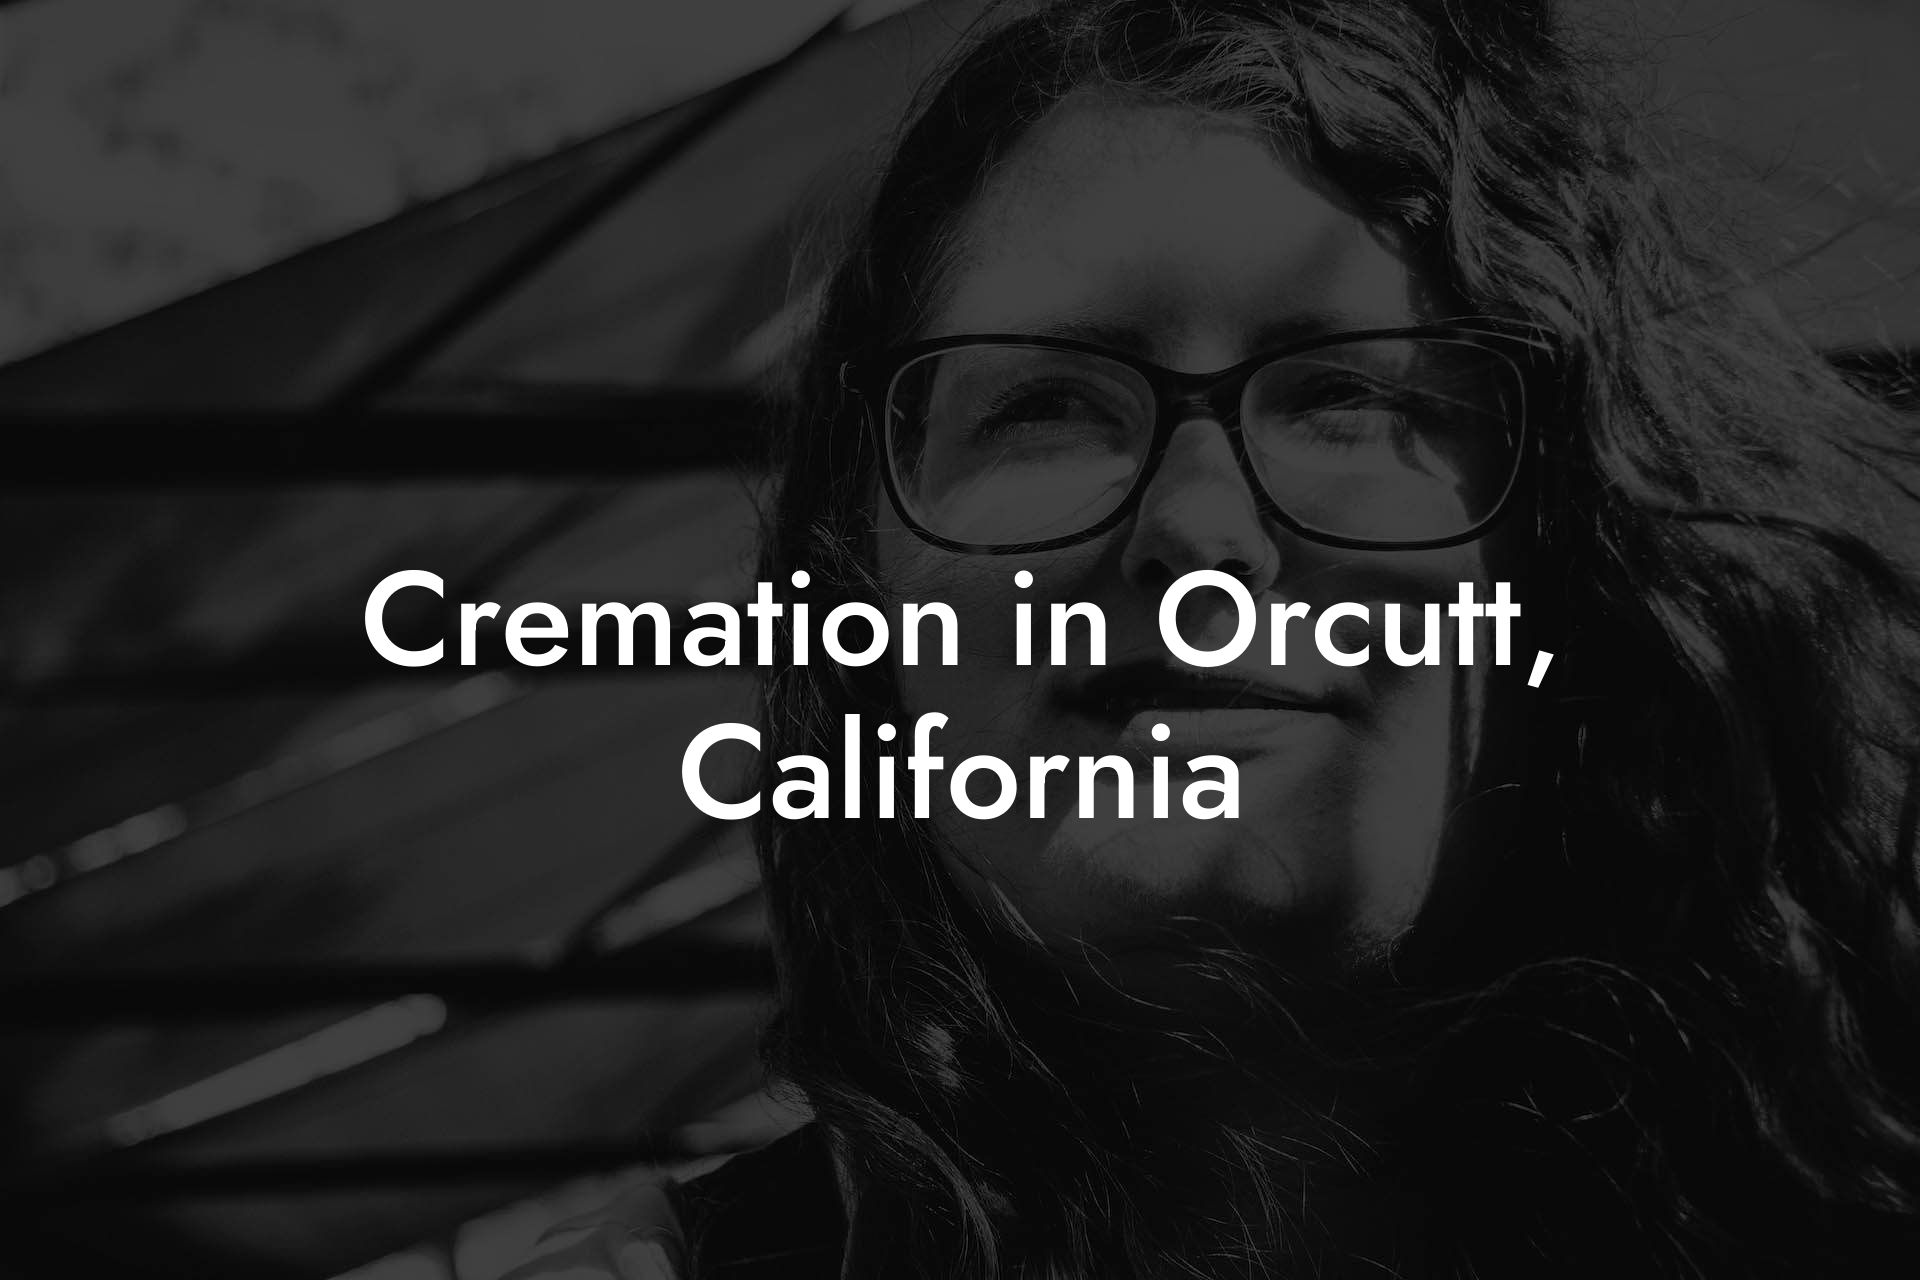 Cremation in Orcutt, California